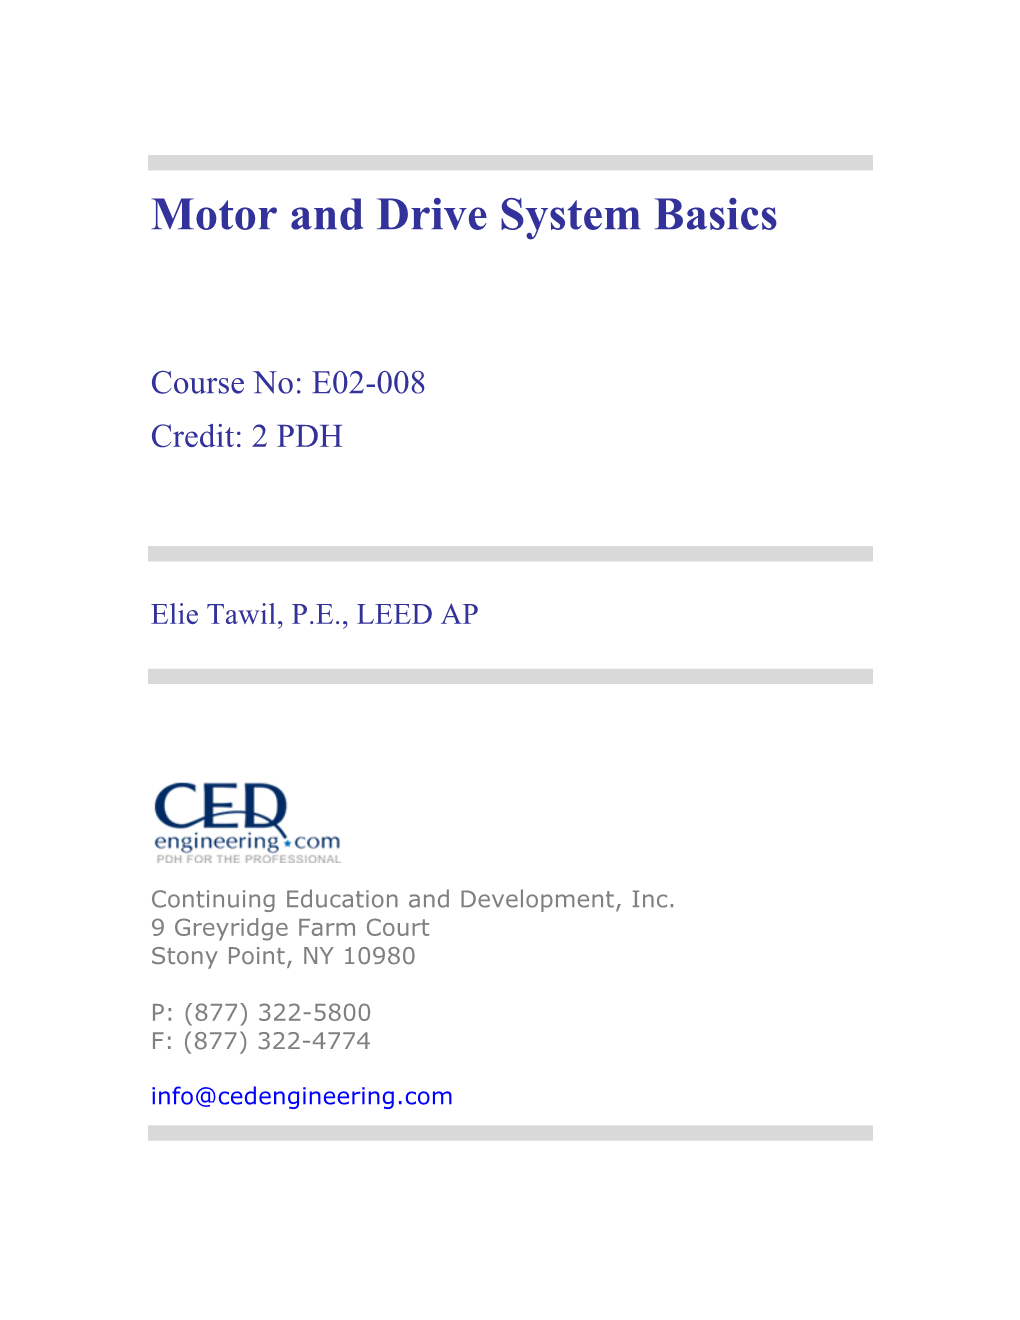 Improving Motor and Drive System Performance: a Sourcebook for Industry Section 1: Motor and Drive System Basics